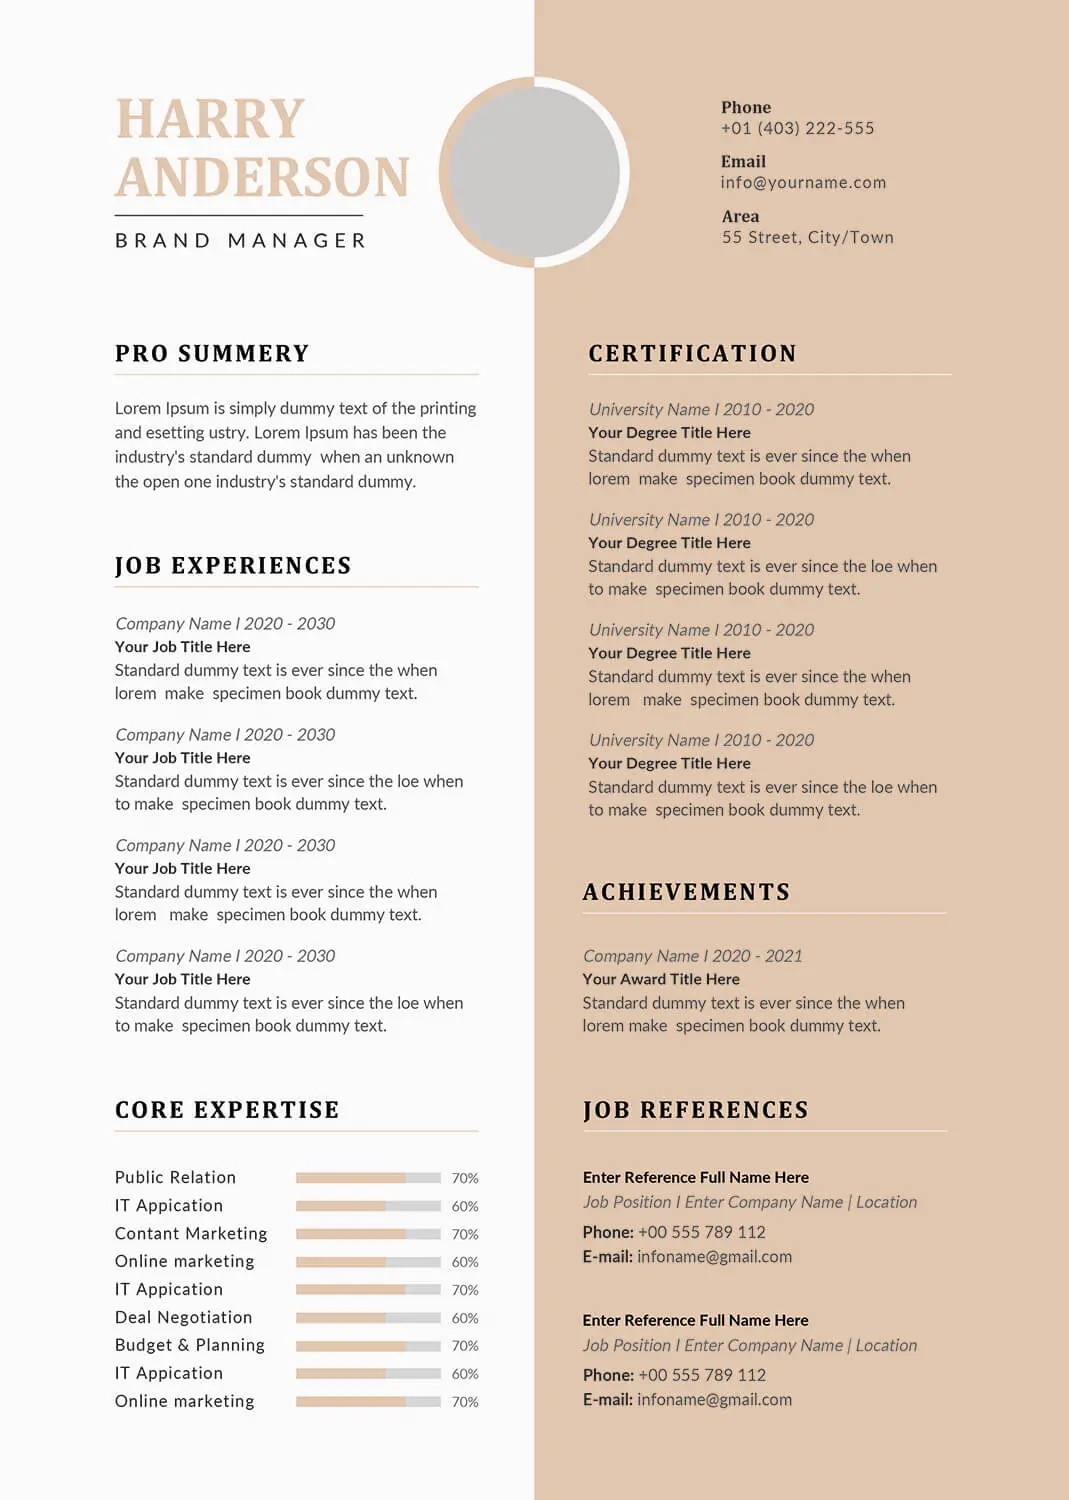 Best resume format for national
sales controllers